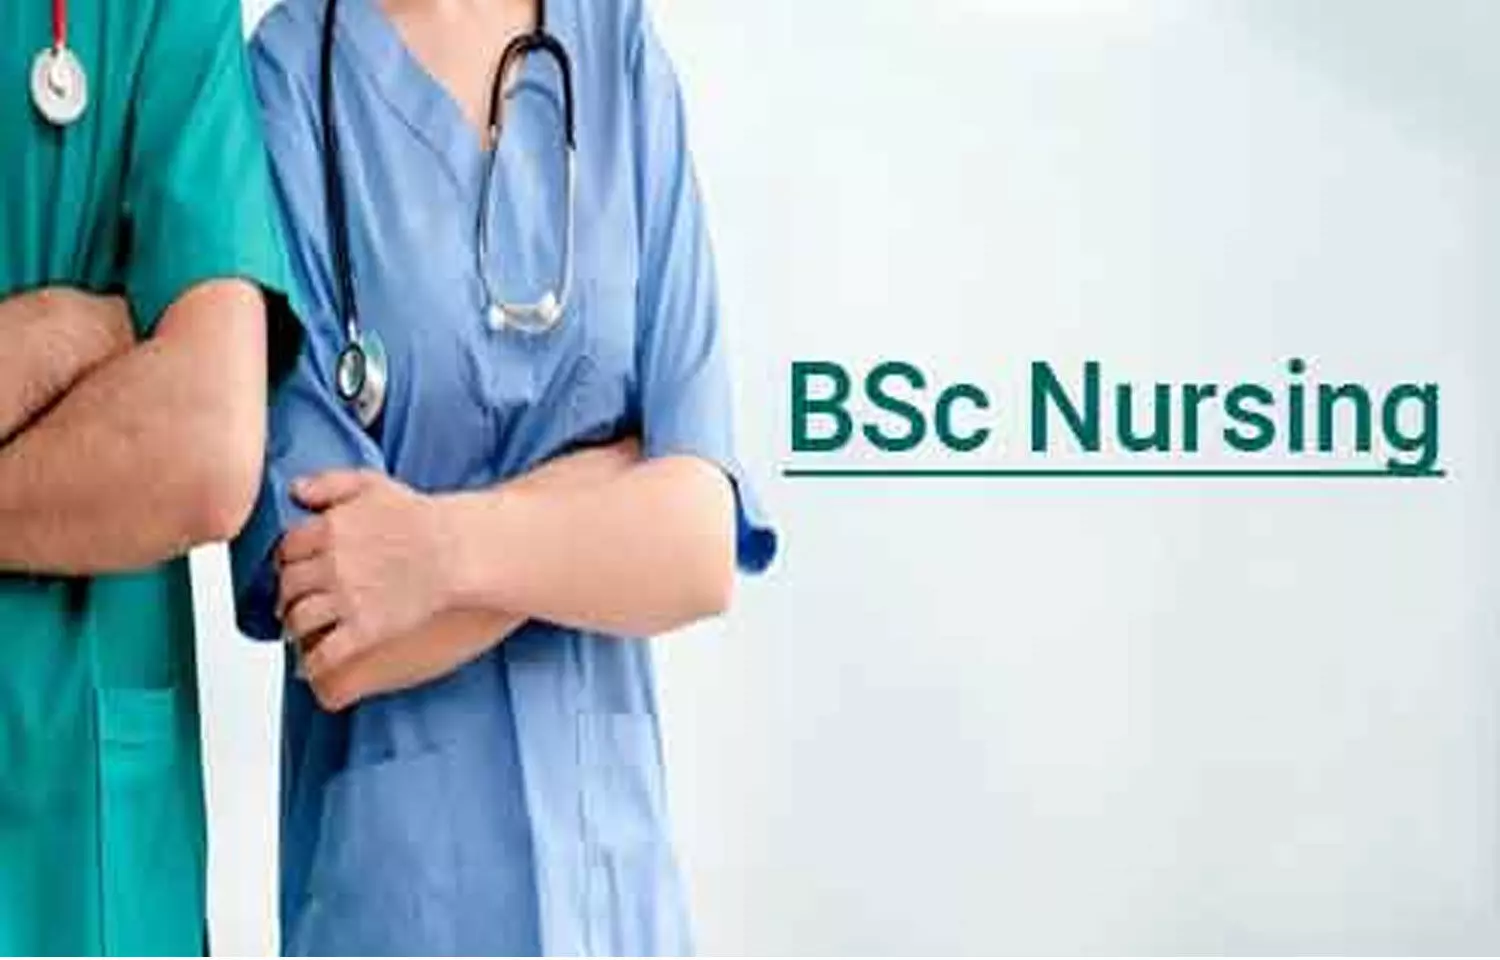 BSc Nursing Hons open round counselling: AIIMS releases seat allocation details